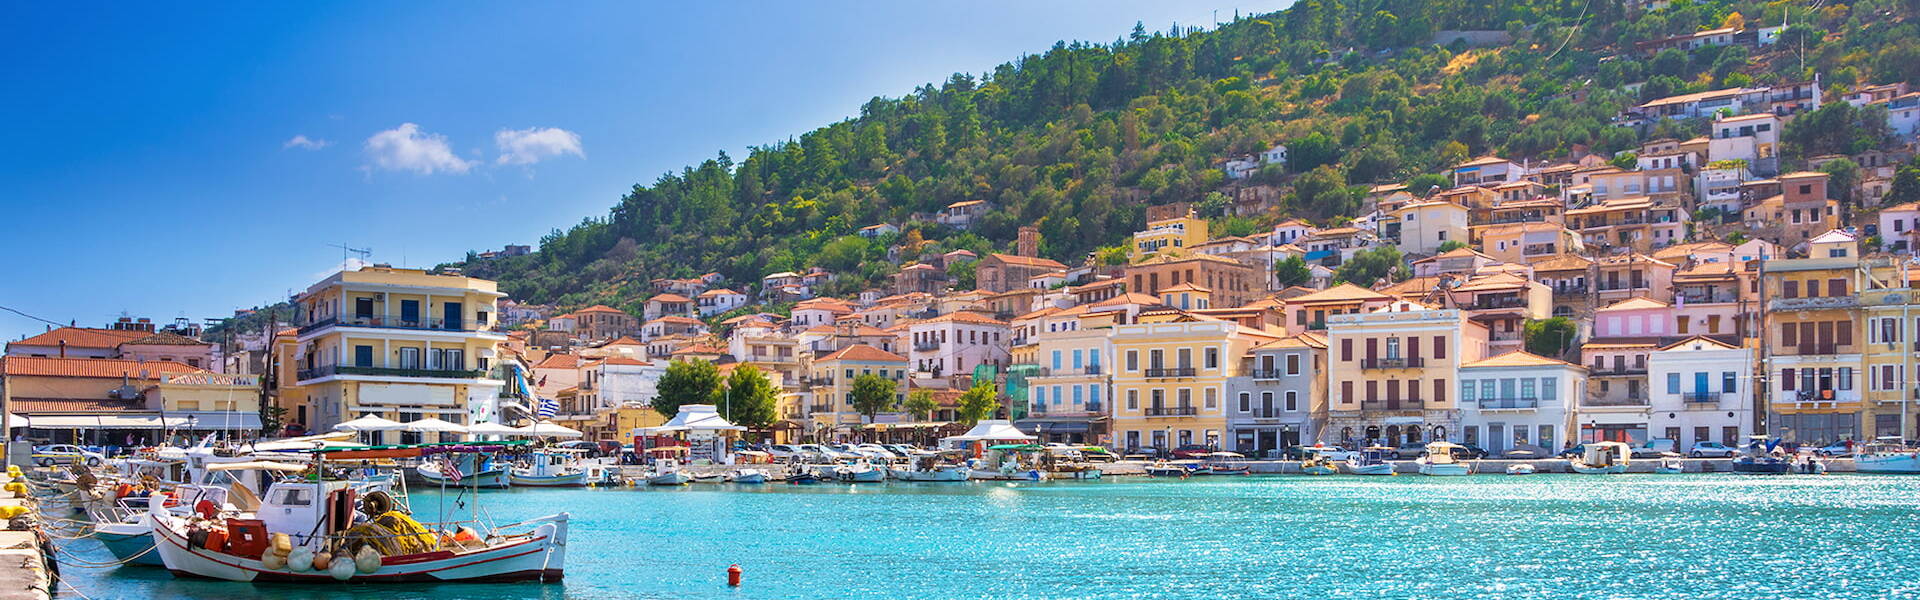 Gytheio coast with bright blue waters, blue skies and colorful buildings on the coast